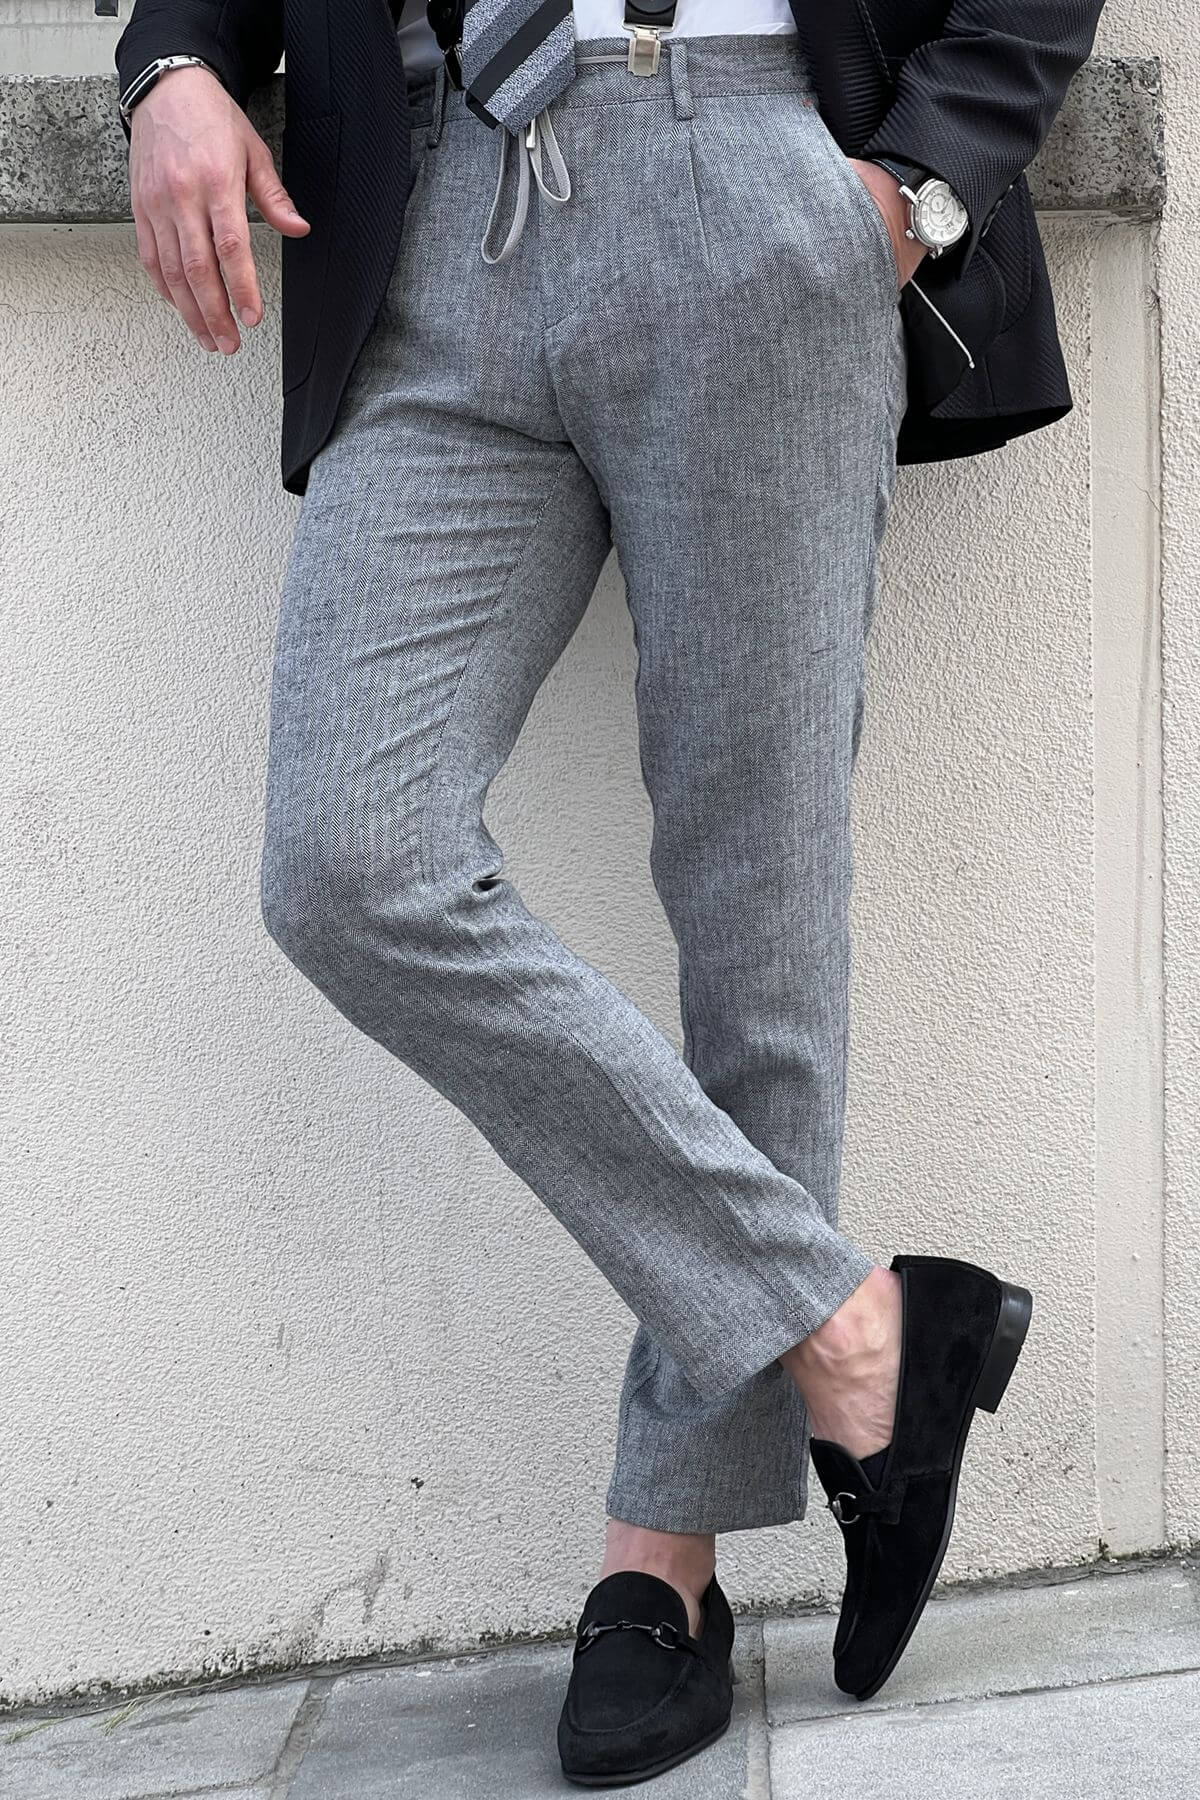 A Slim Fit Beige Gray Trouser on display